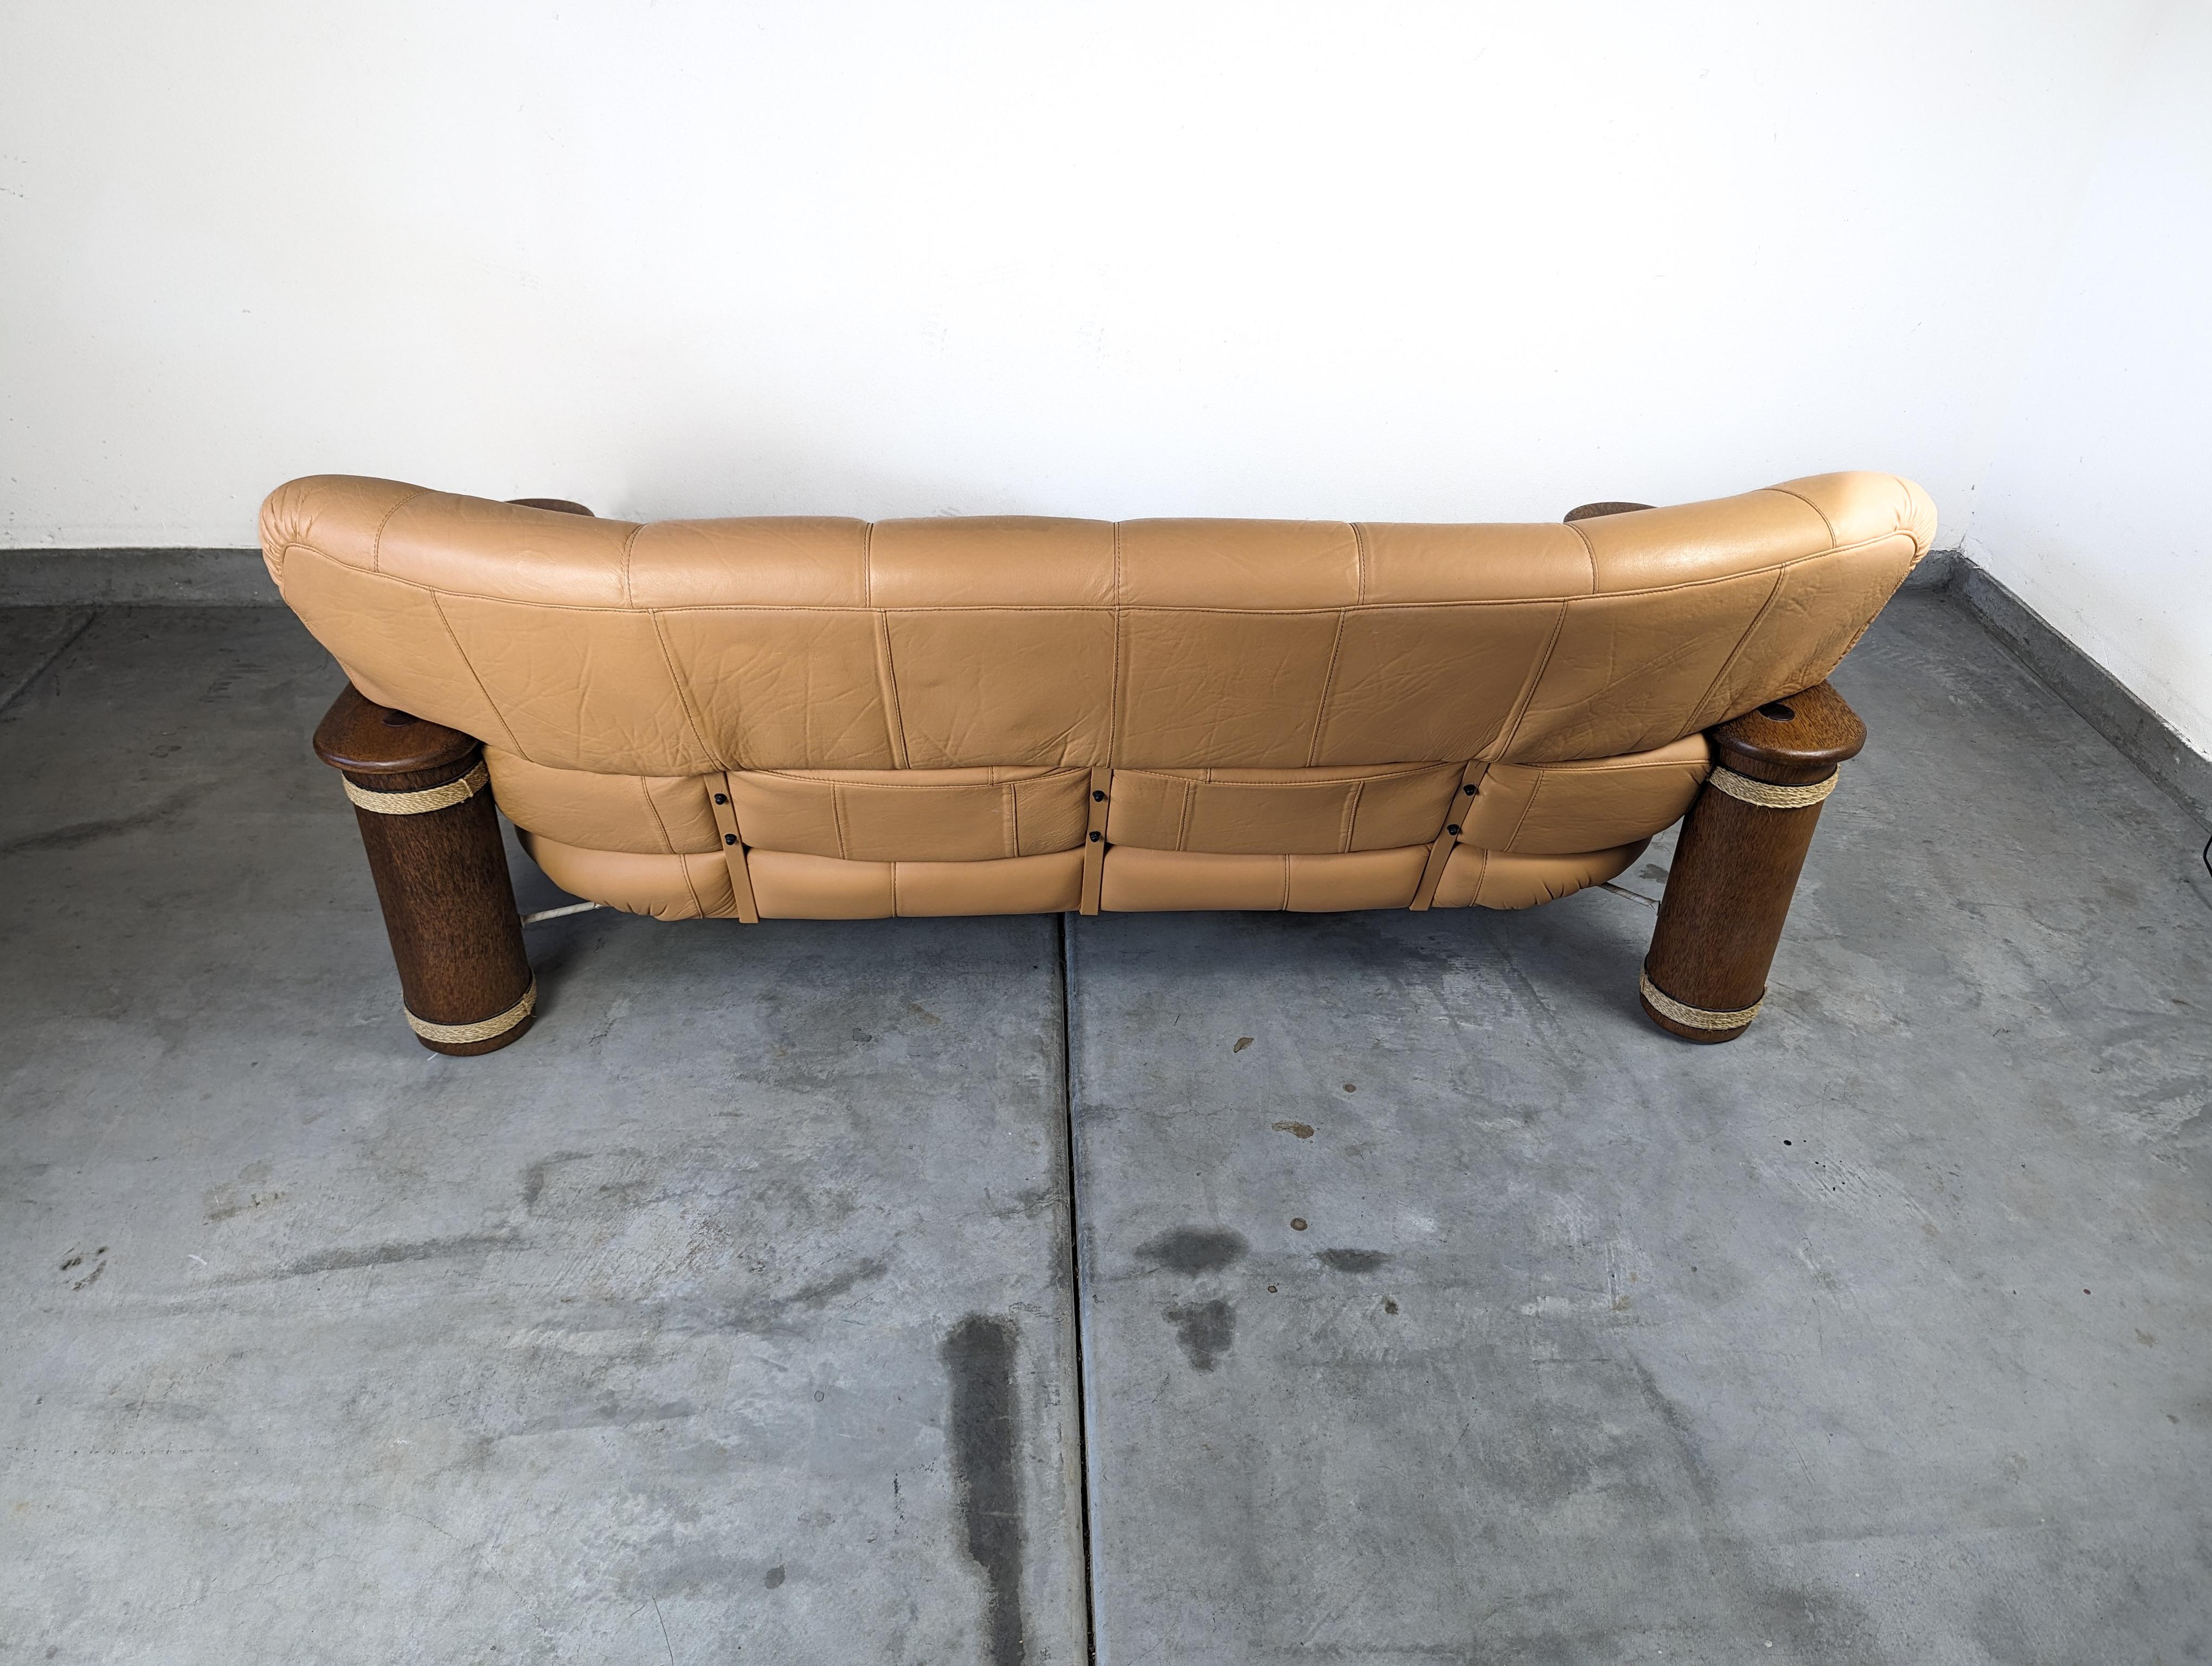 Vintage Leather and Palmwood Three-Seat Sofa by Pacific Green, c1990s For Sale 8